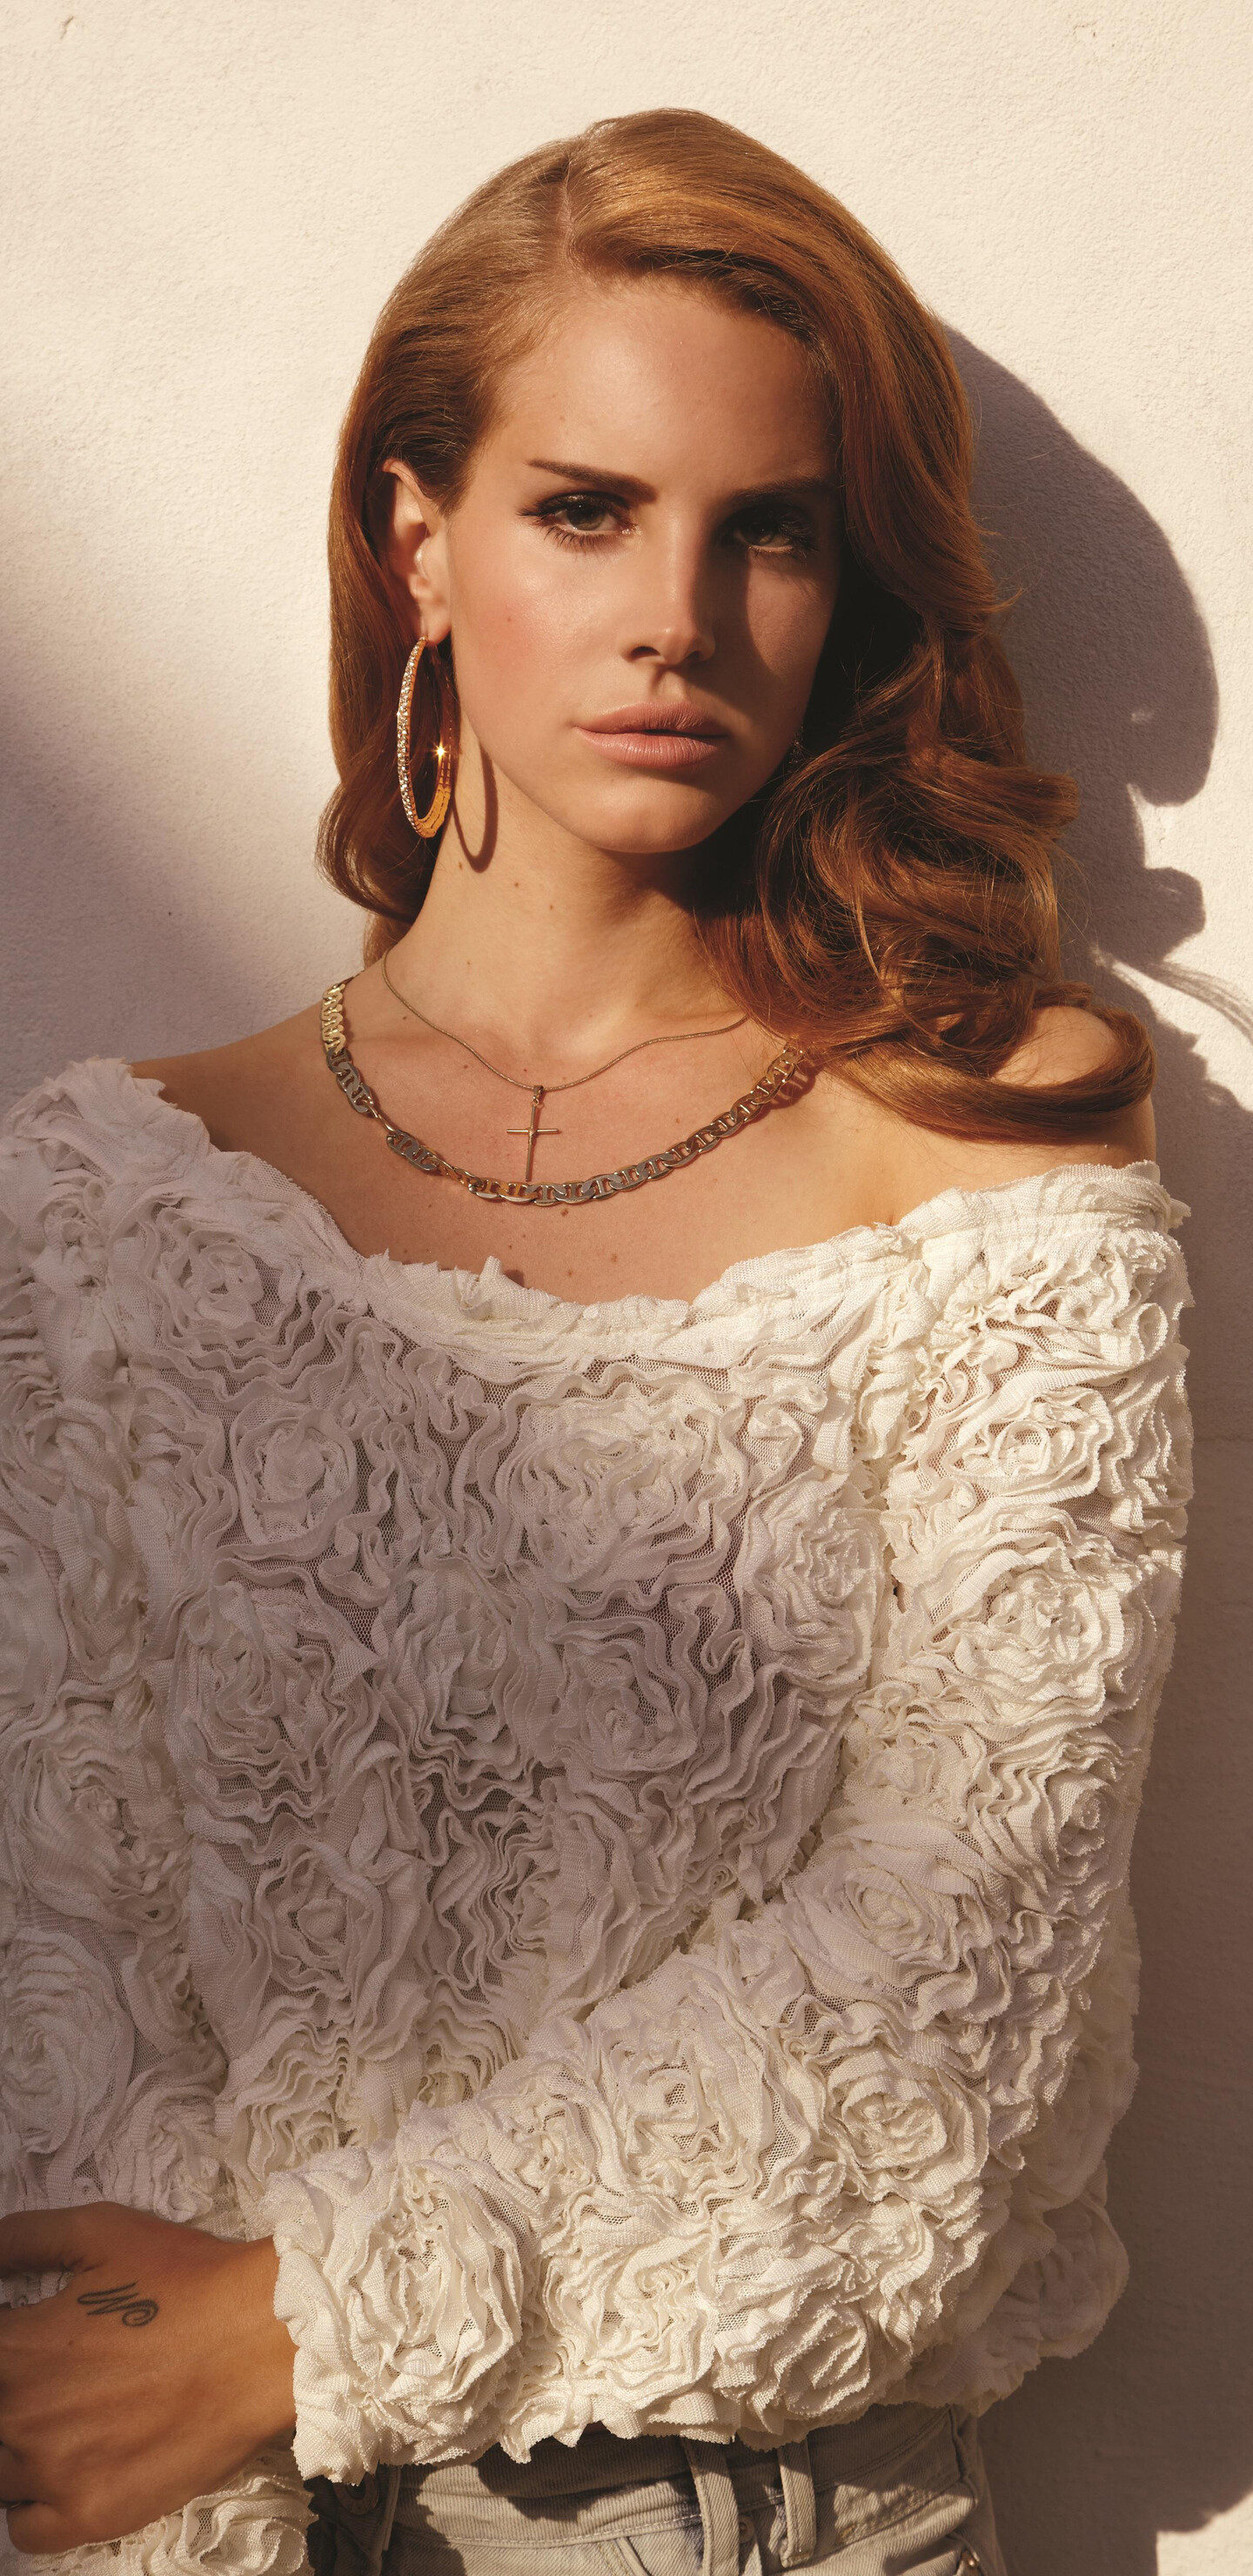 Lana Del Rey: Elizabeth Woolridge Grant, Known for her dreamy music and old-Hollywood glamour. 1440x2960 HD Background.